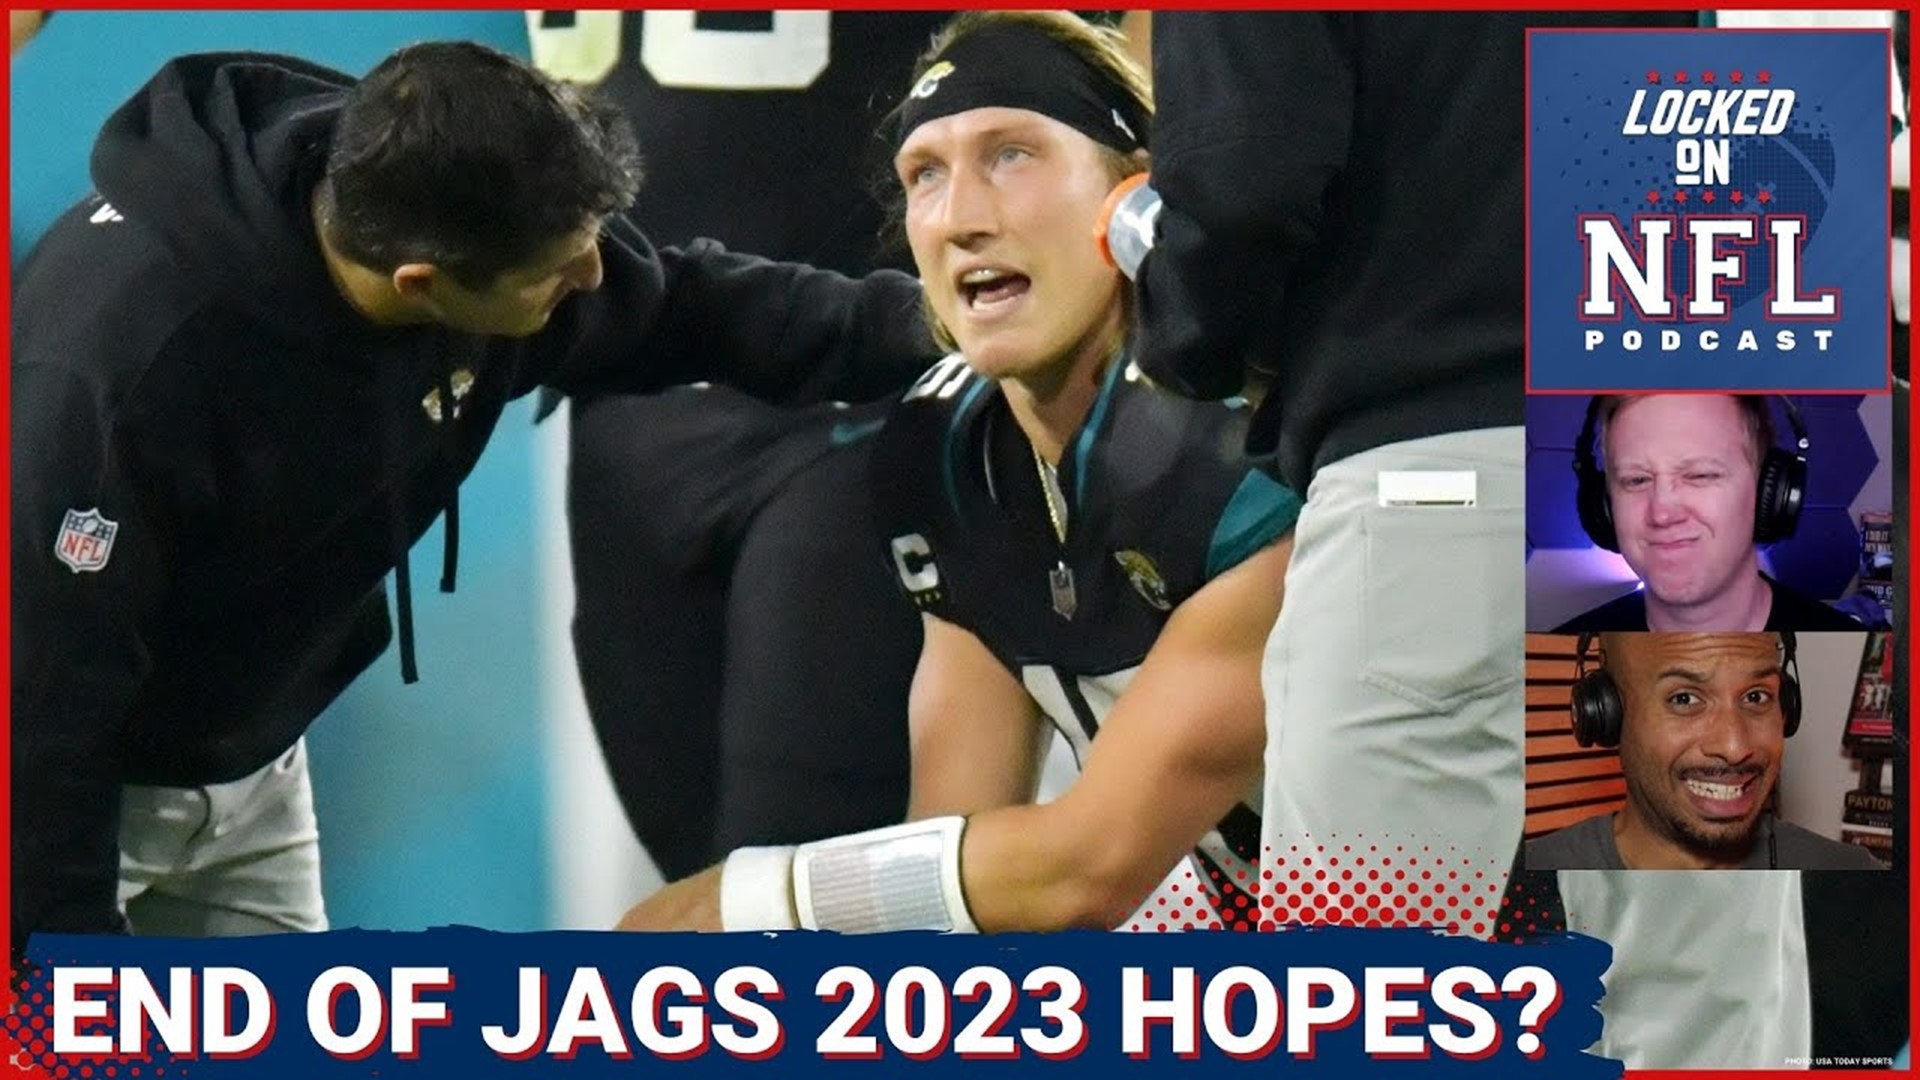 The Jacksonville Jaguars were on their way to competing for the AFC's No. 1 seed and now hang in the balance after a Trevor Lawrence ankle injury